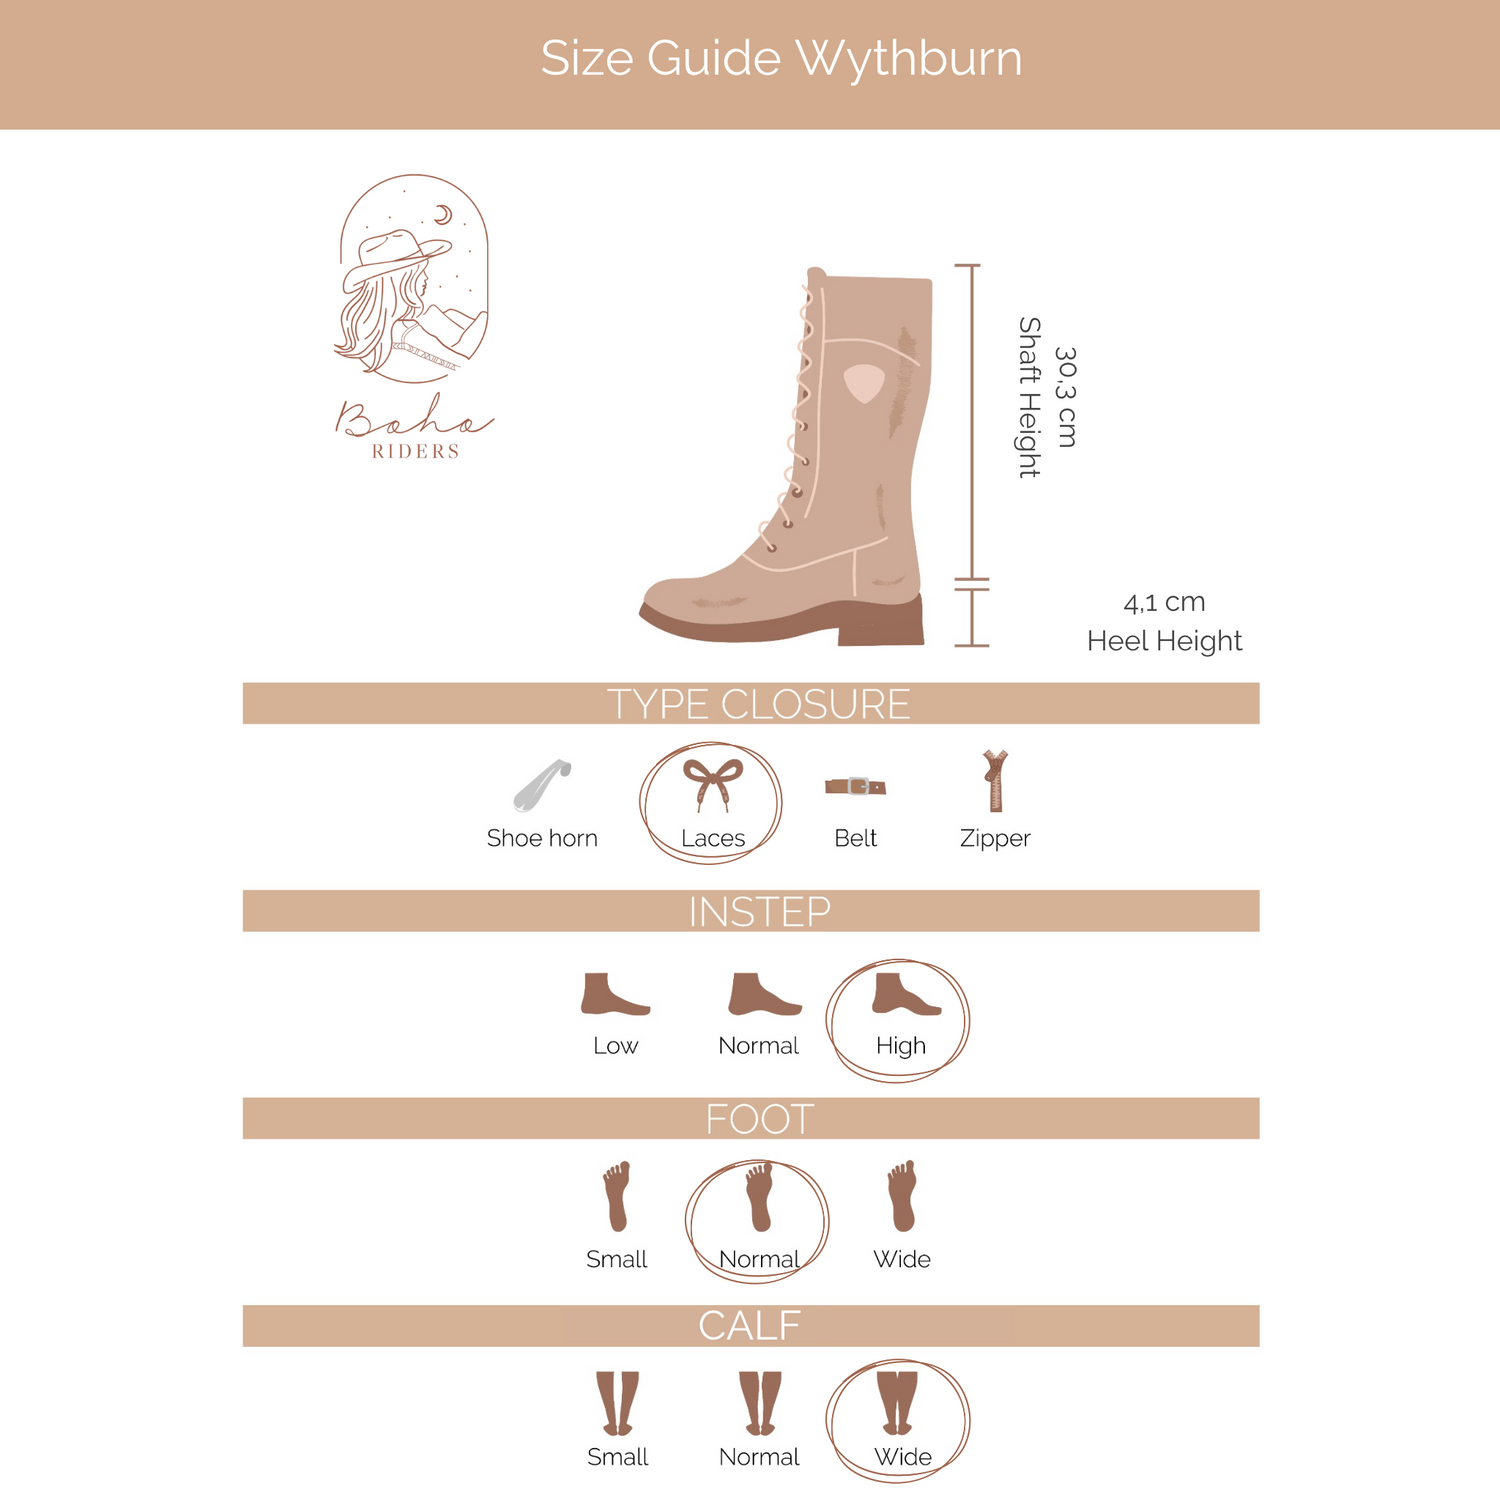 What you want to know about the fit ofAriat Wythburn II H2O Waterproof- Riding Boots- Outdoor Boots - Wheathered Brown